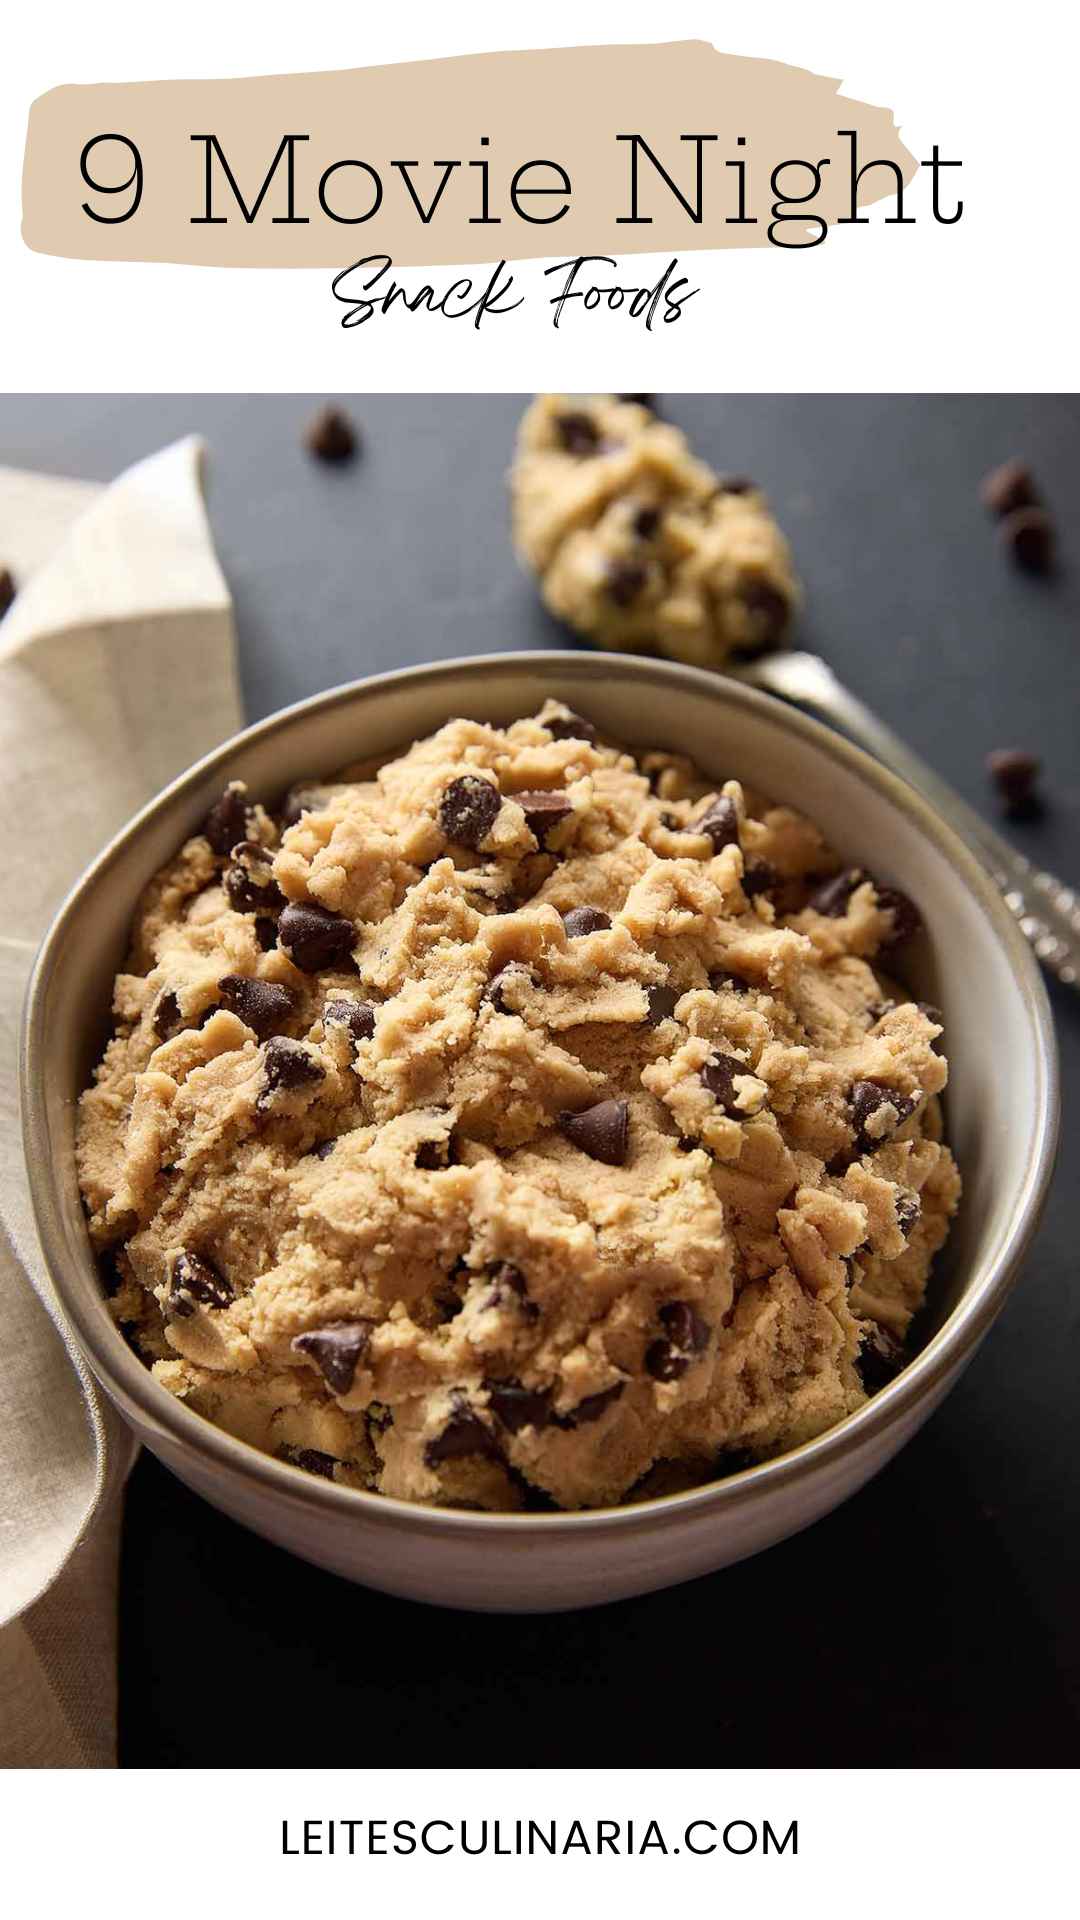 A bowl of chocolate chip cookie dough.